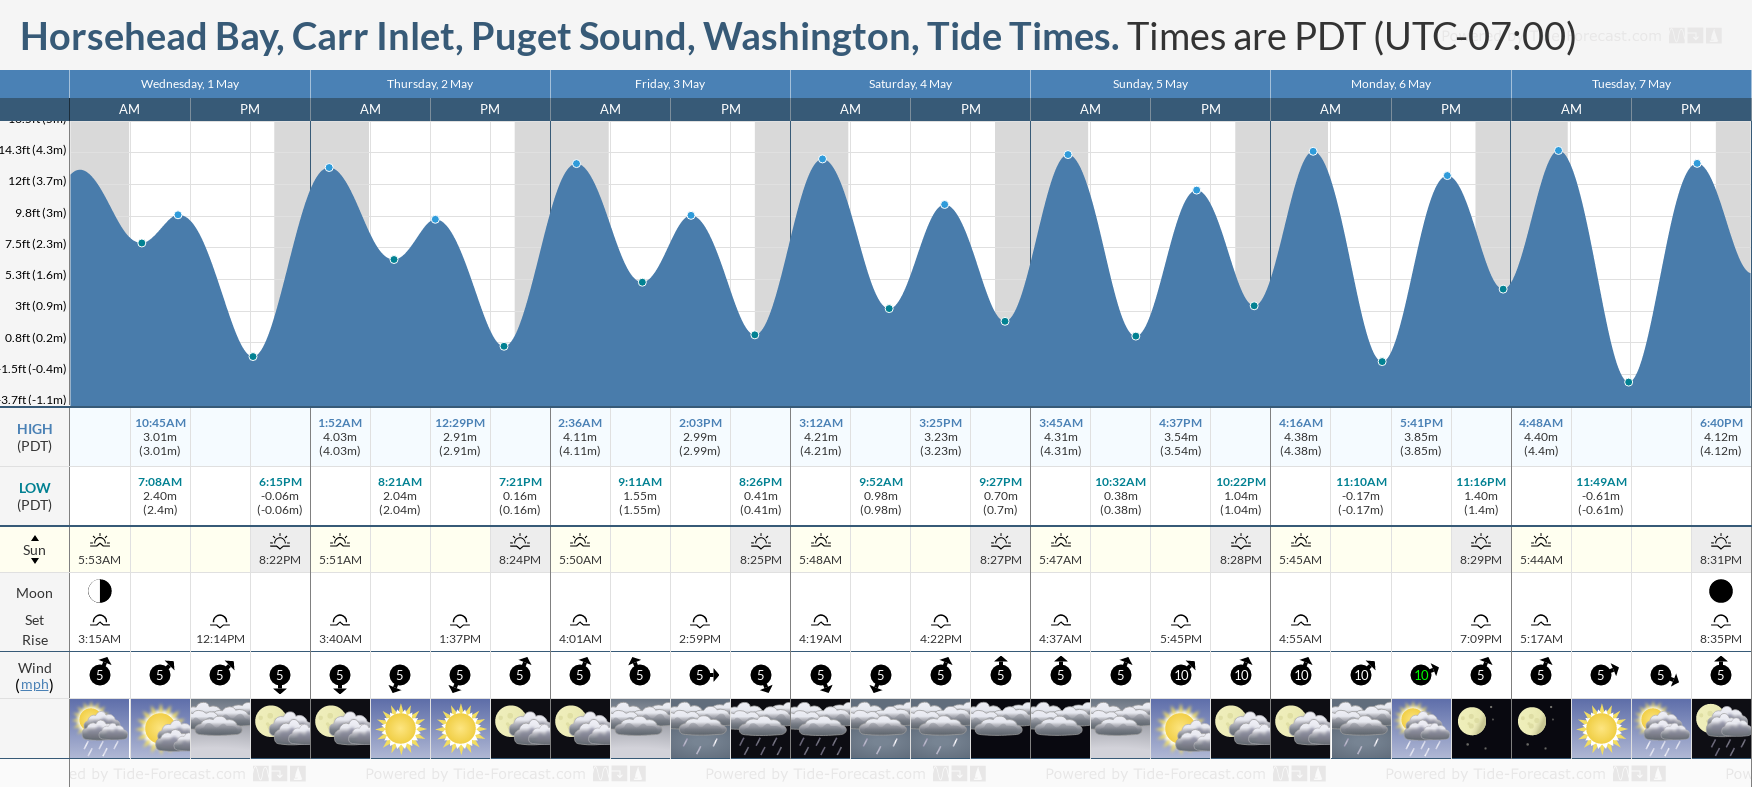 Horsehead Bay, Carr Inlet, Puget Sound, Washington Tide Chart including high and low tide times for the next 7 days